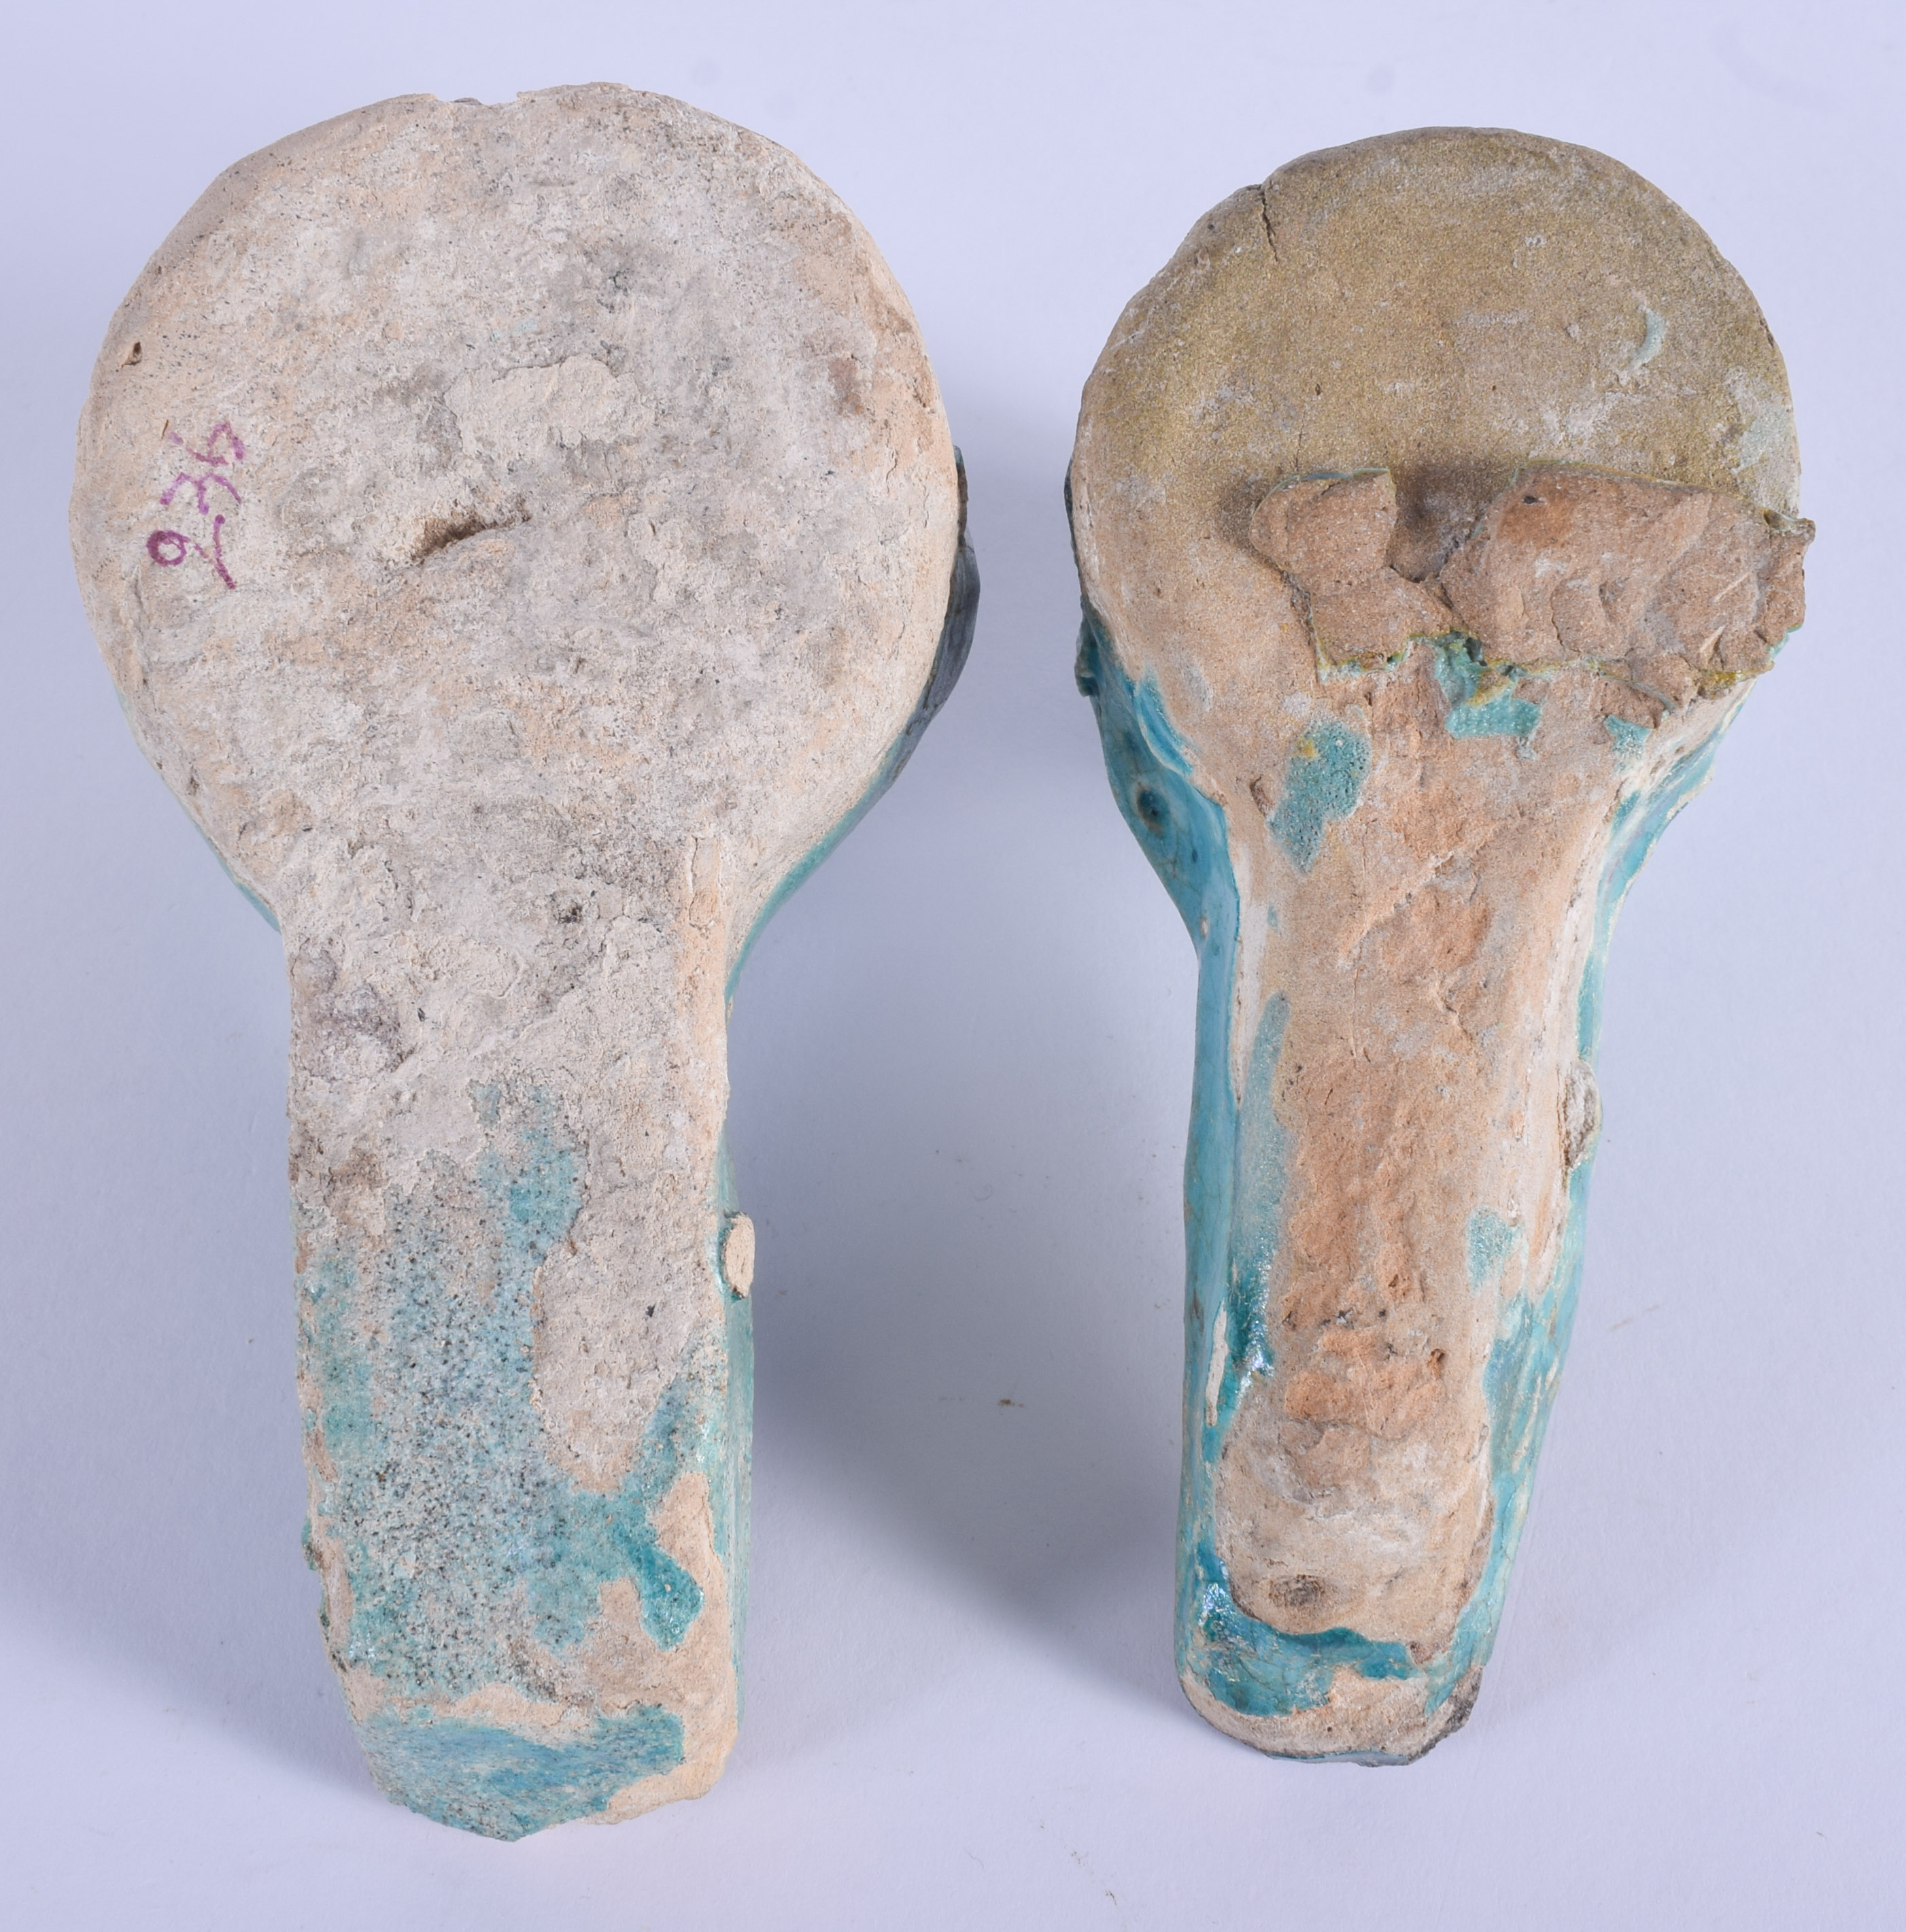 A PAIR OF 12TH/13TH CENTURY PERSIAN TURQUOISE GLAZED OIL LAMPS Iran. 14 cm x 7 cm. (2) - Image 4 of 4